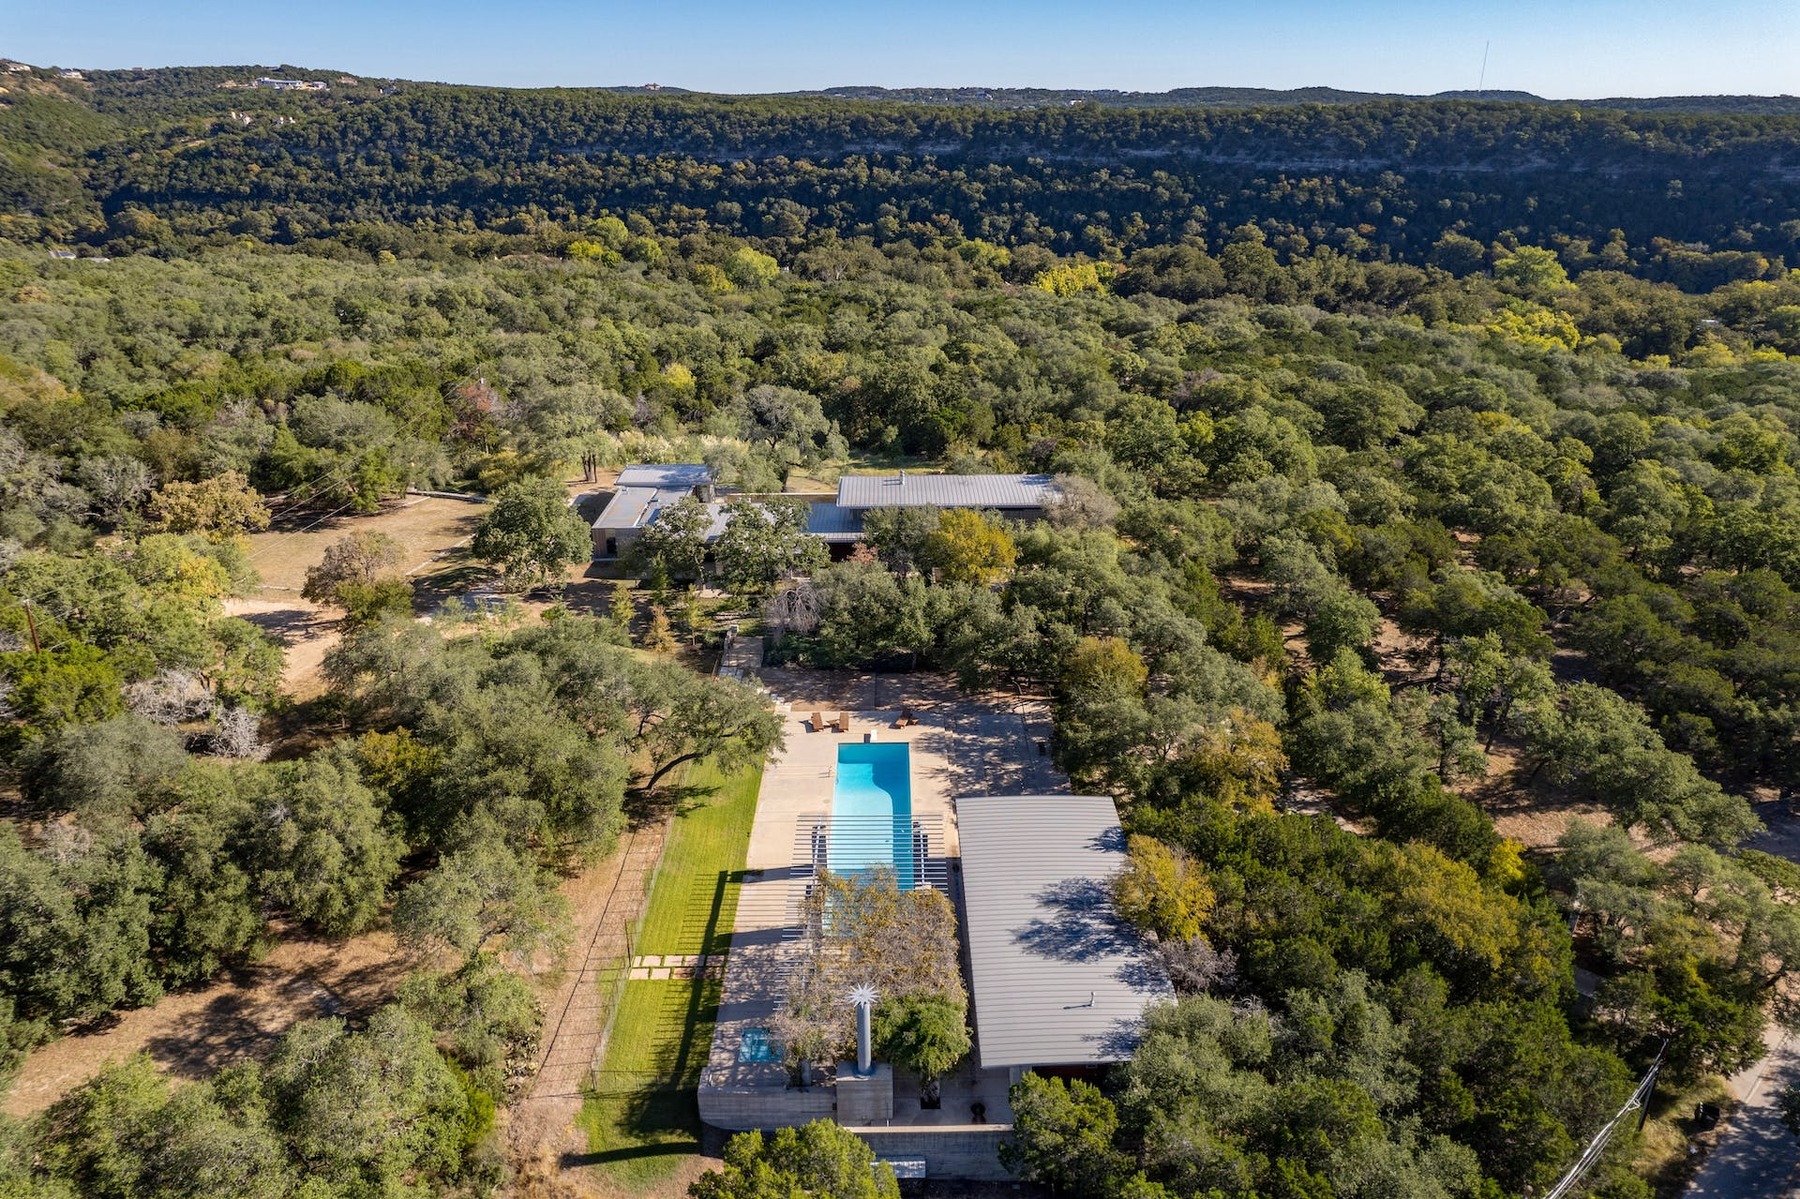 Aerial Close-Up View Of Modern Austin Compound Located At 2508 N. Cuernavaca Drive